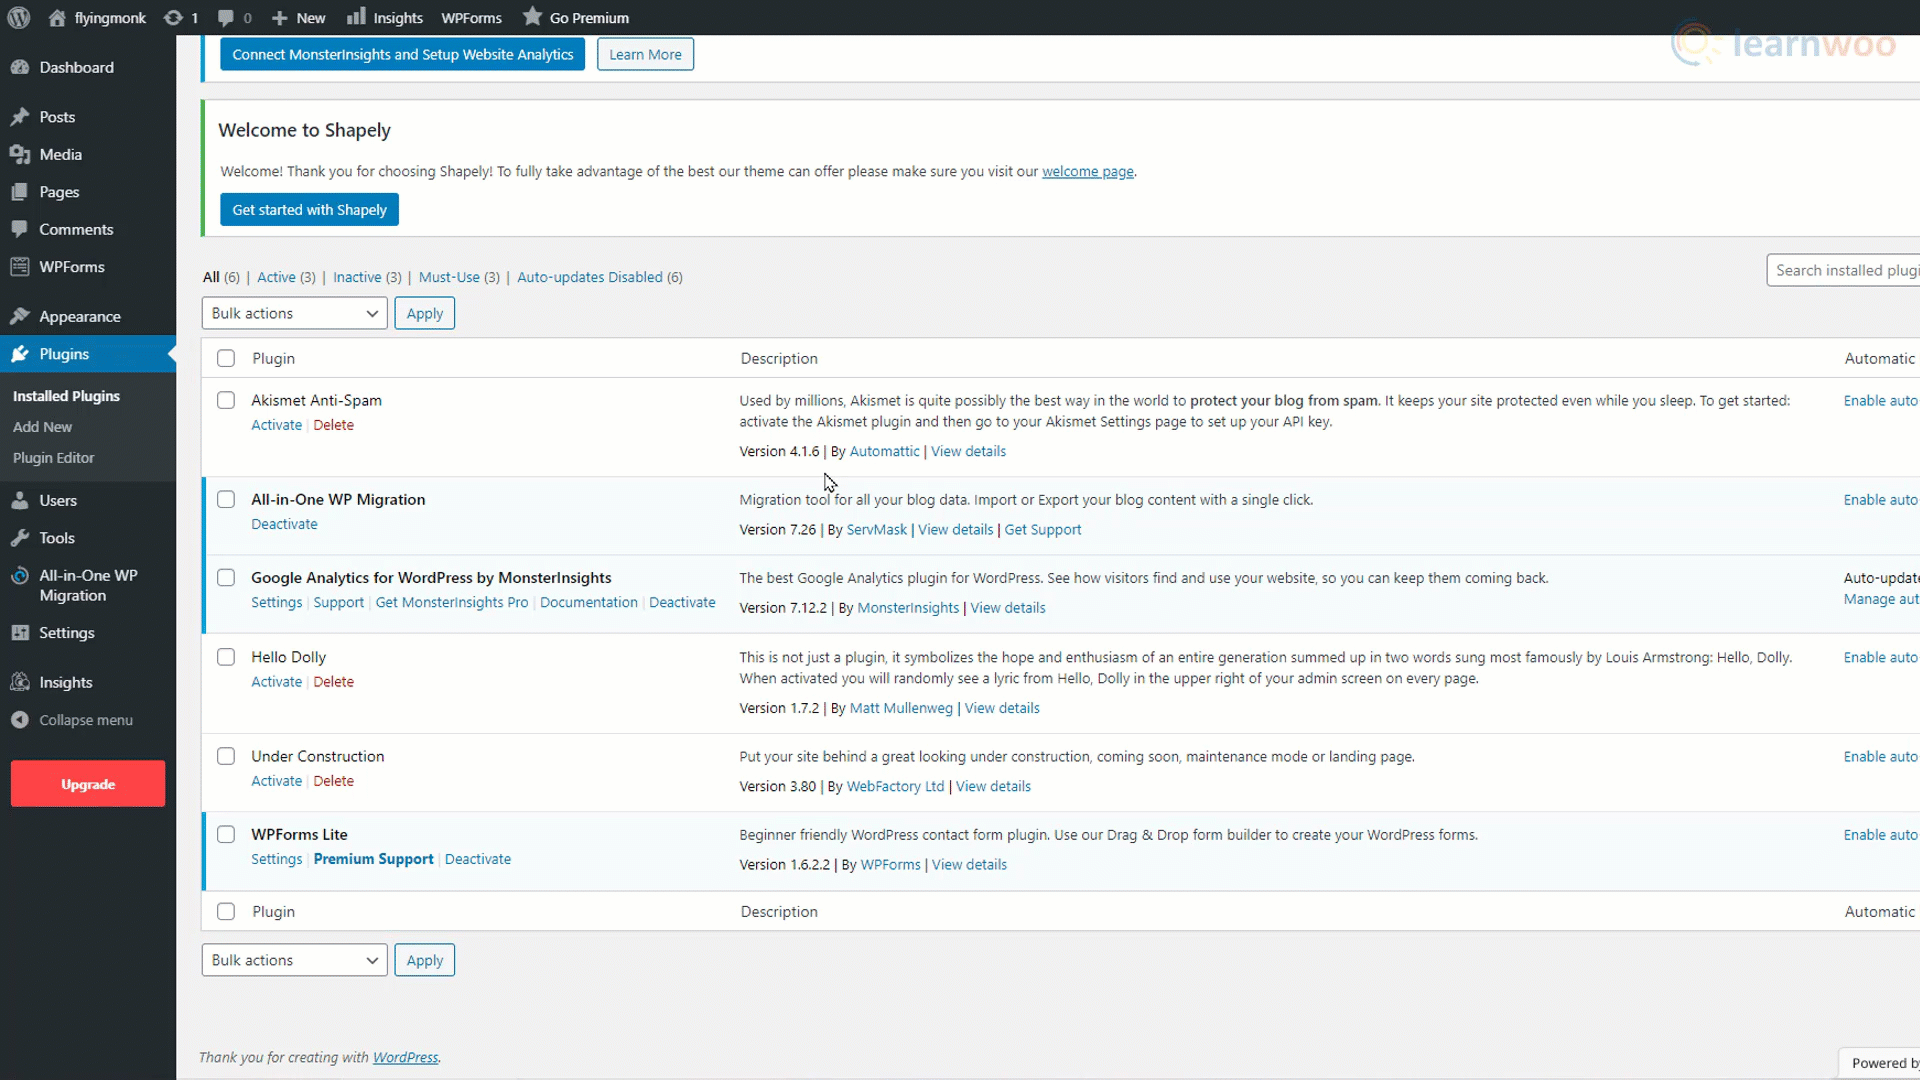 gif about deactivating wordpress plugins